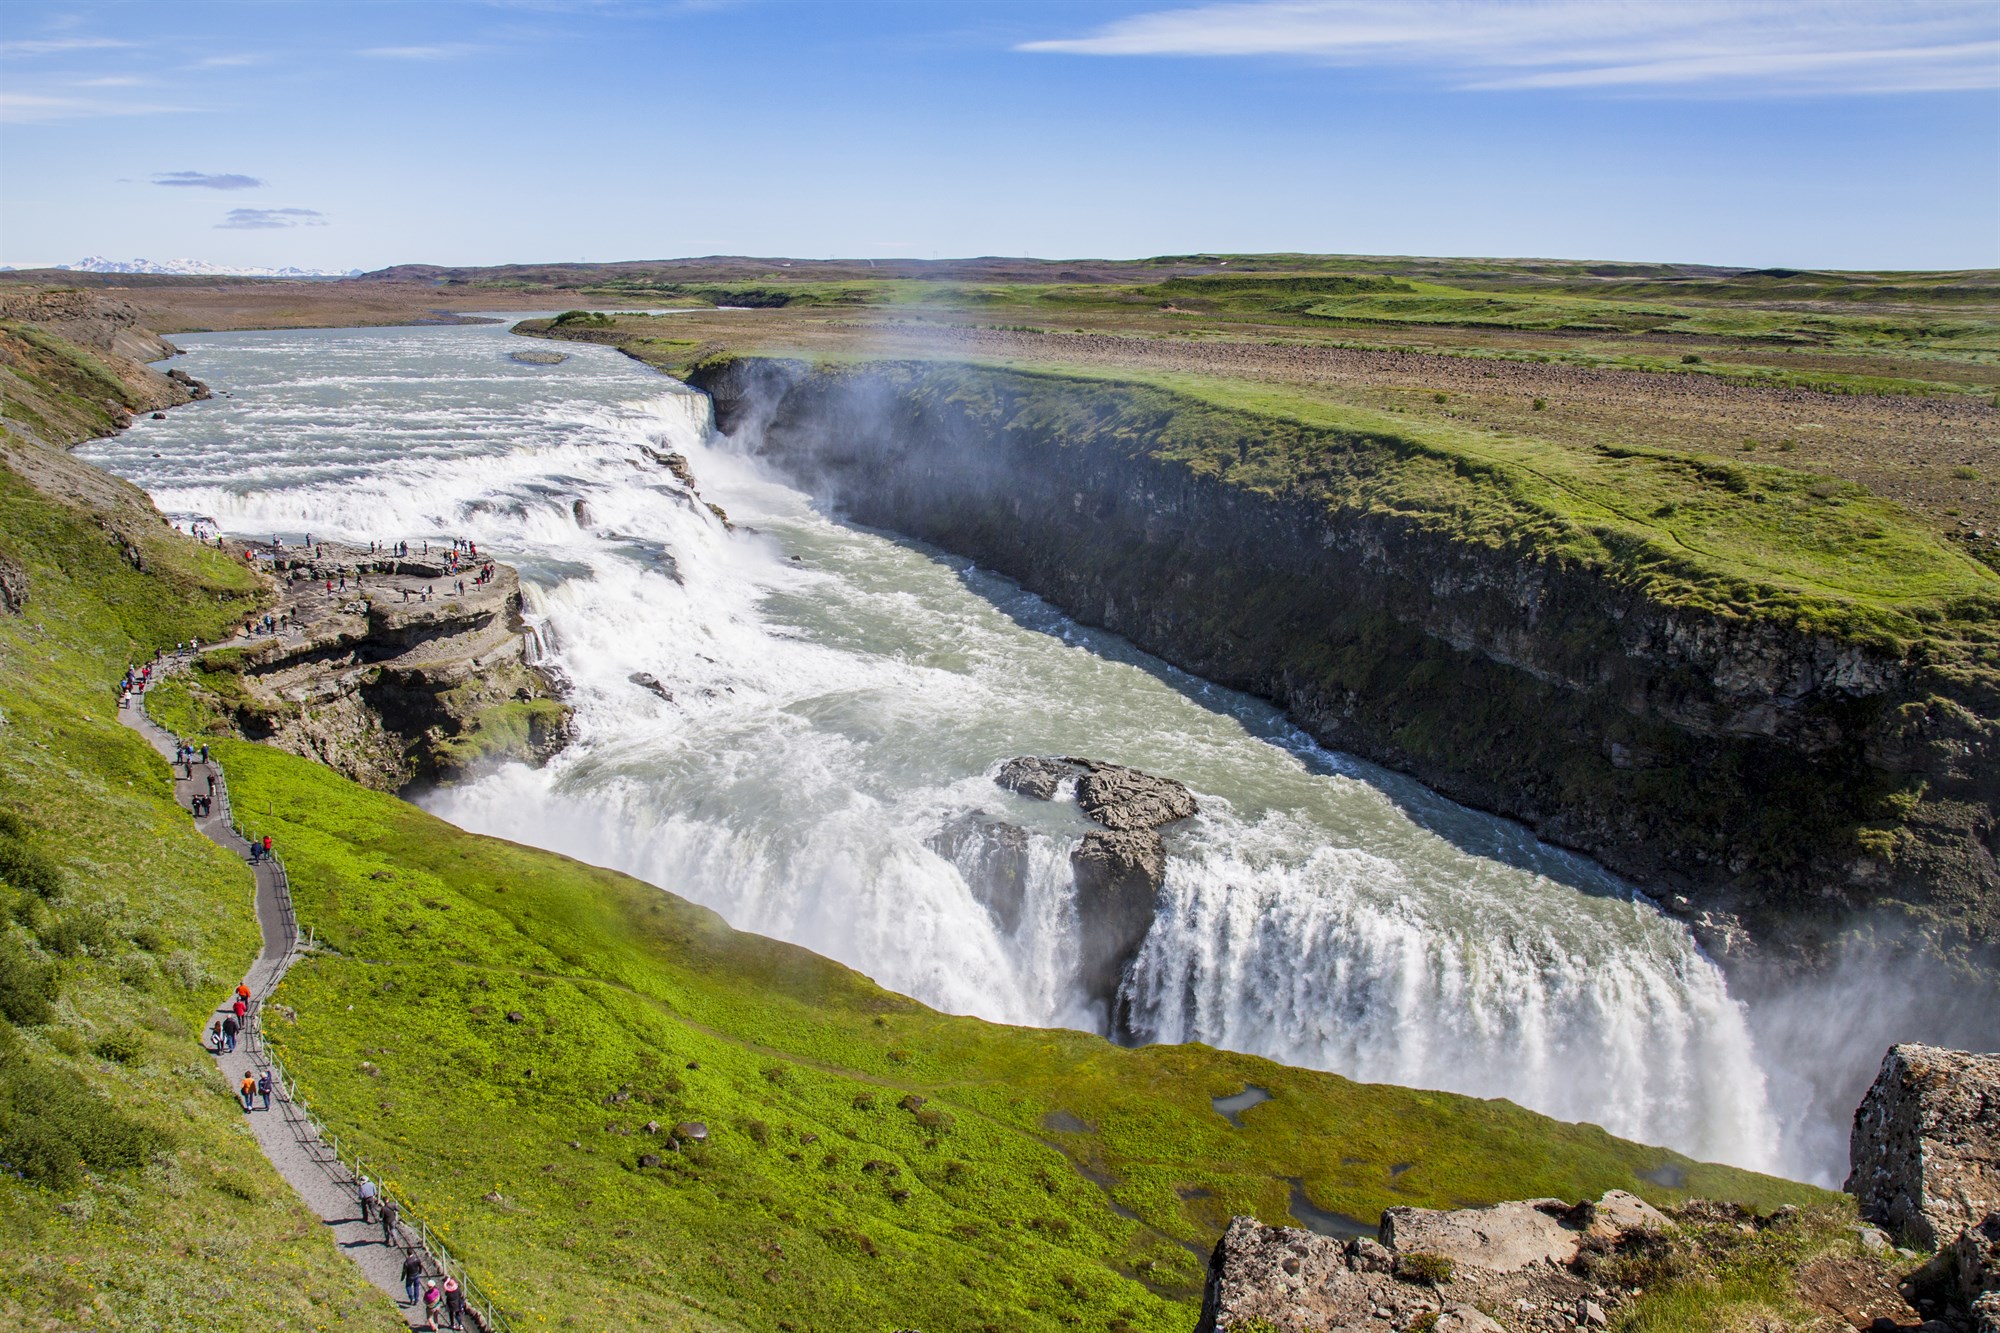 Trails and walking paths at Gullfoss waterfall.